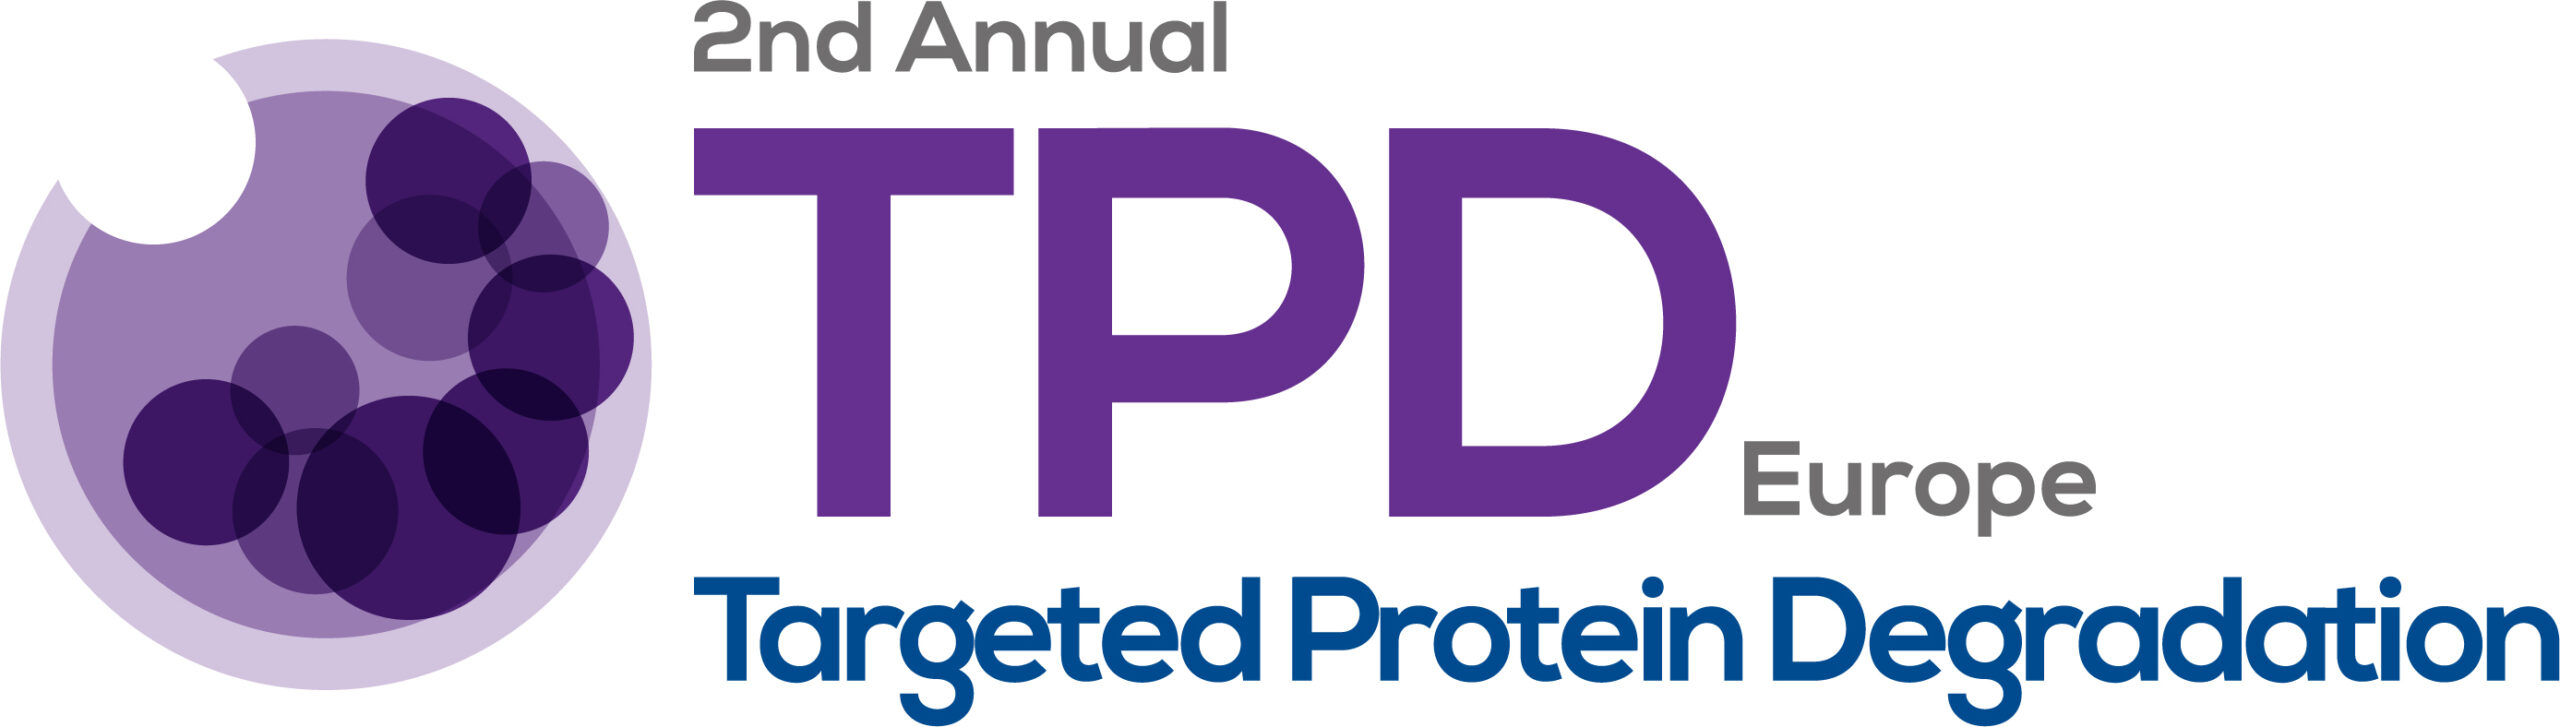 4793_TPD-Targeted_Protein_Degradation_Europe_Logo_2021